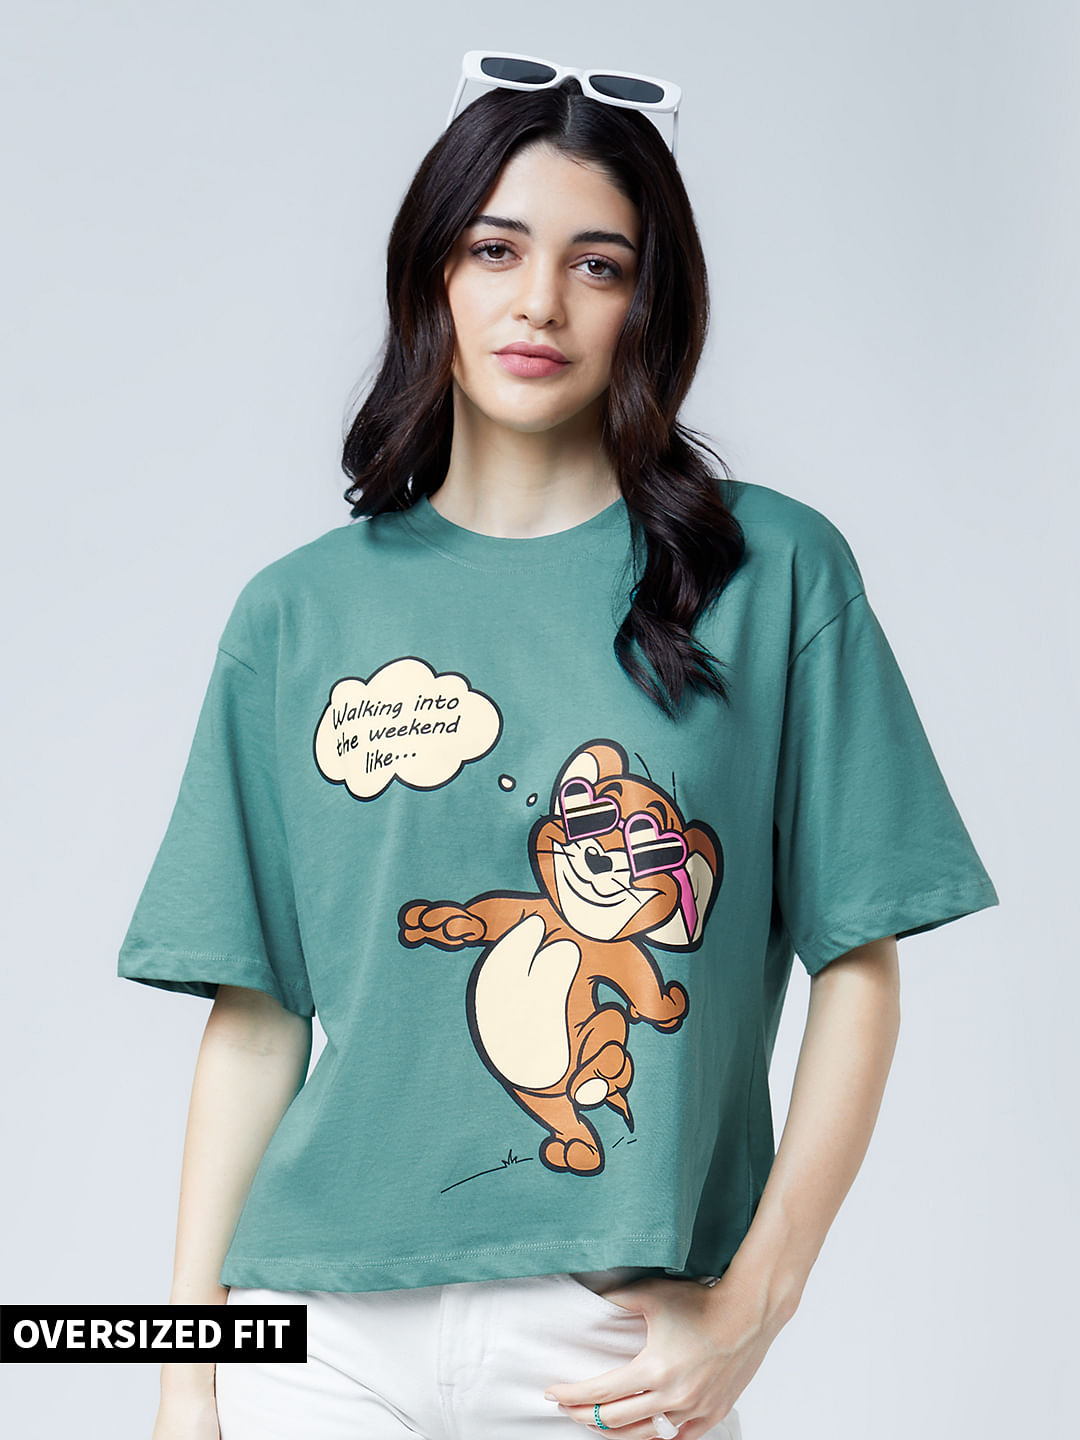 Buy Official Tom And Jerry: Weekend Women Oversized T-Shirt online at ...